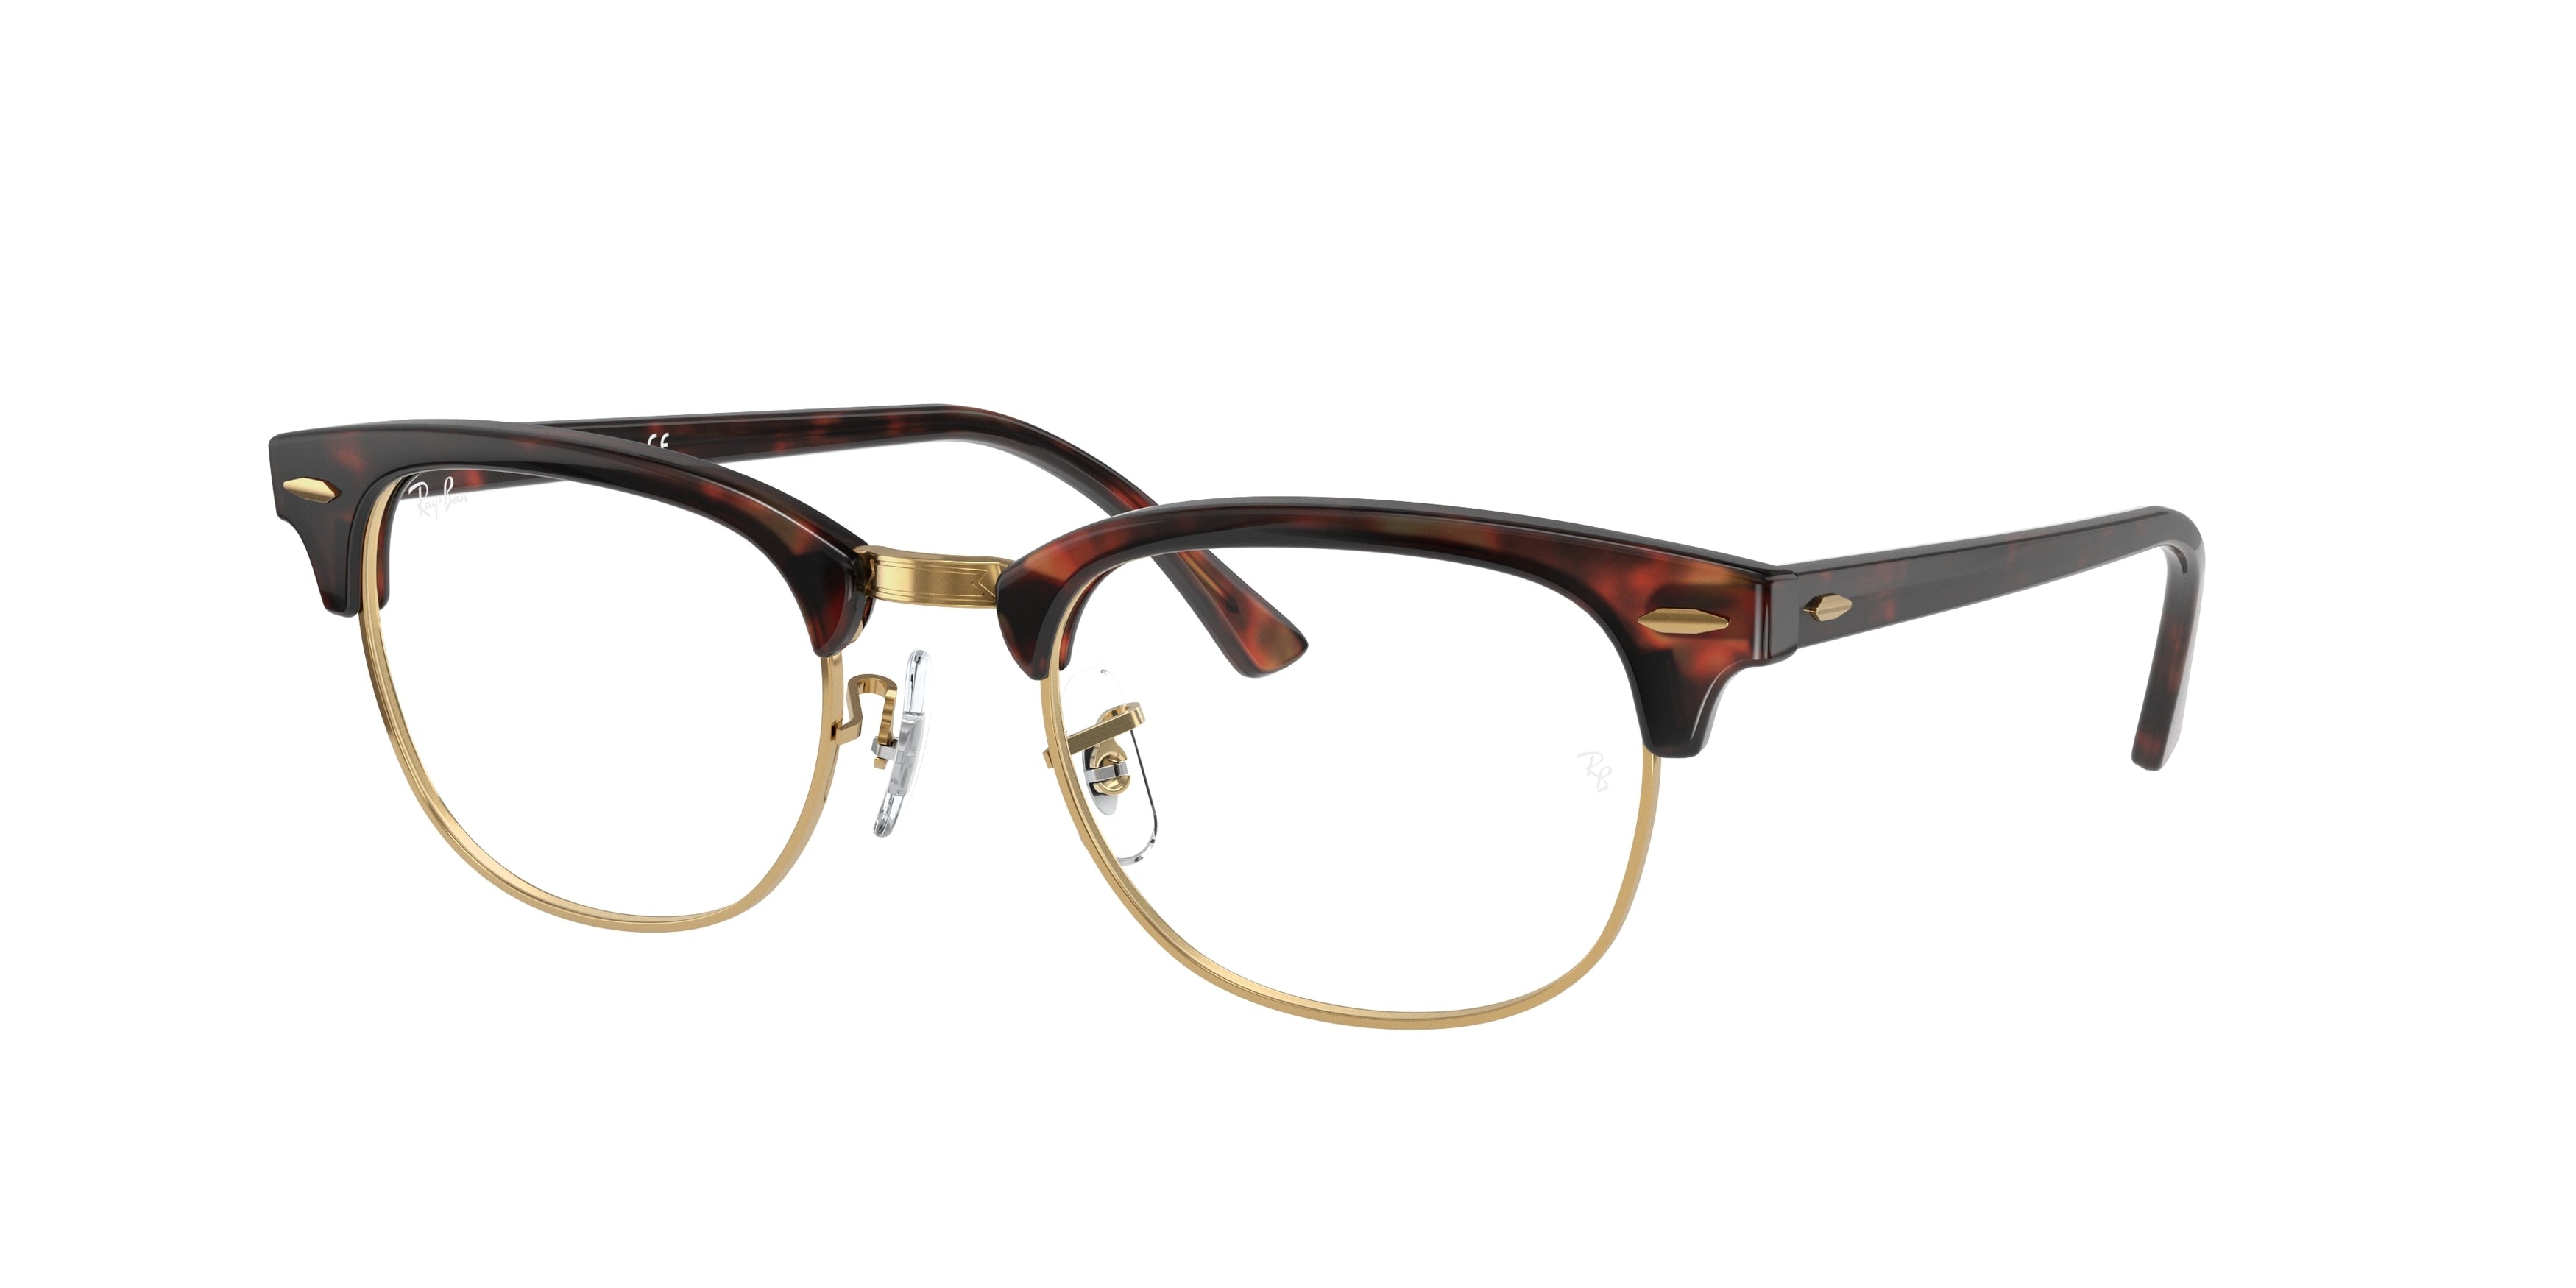 Ray-Ban Optical CLUBMASTER RX5154 Square Eyeglasses  8058-Tortoise 50-145-21 - Color Map Tortoise